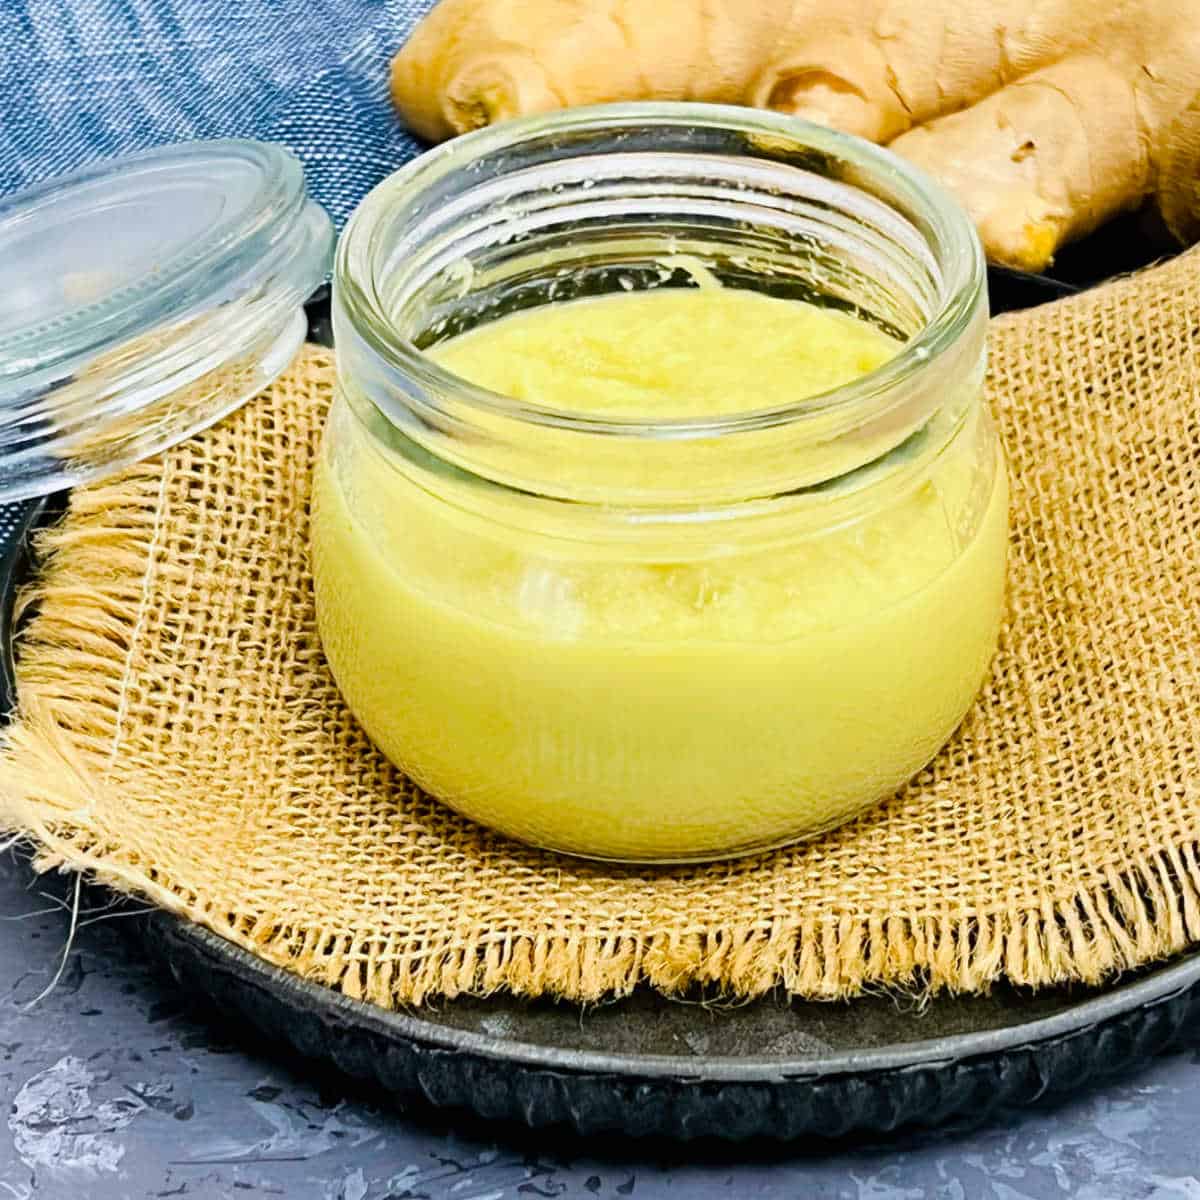 Ginger paste stored in a glass jar.